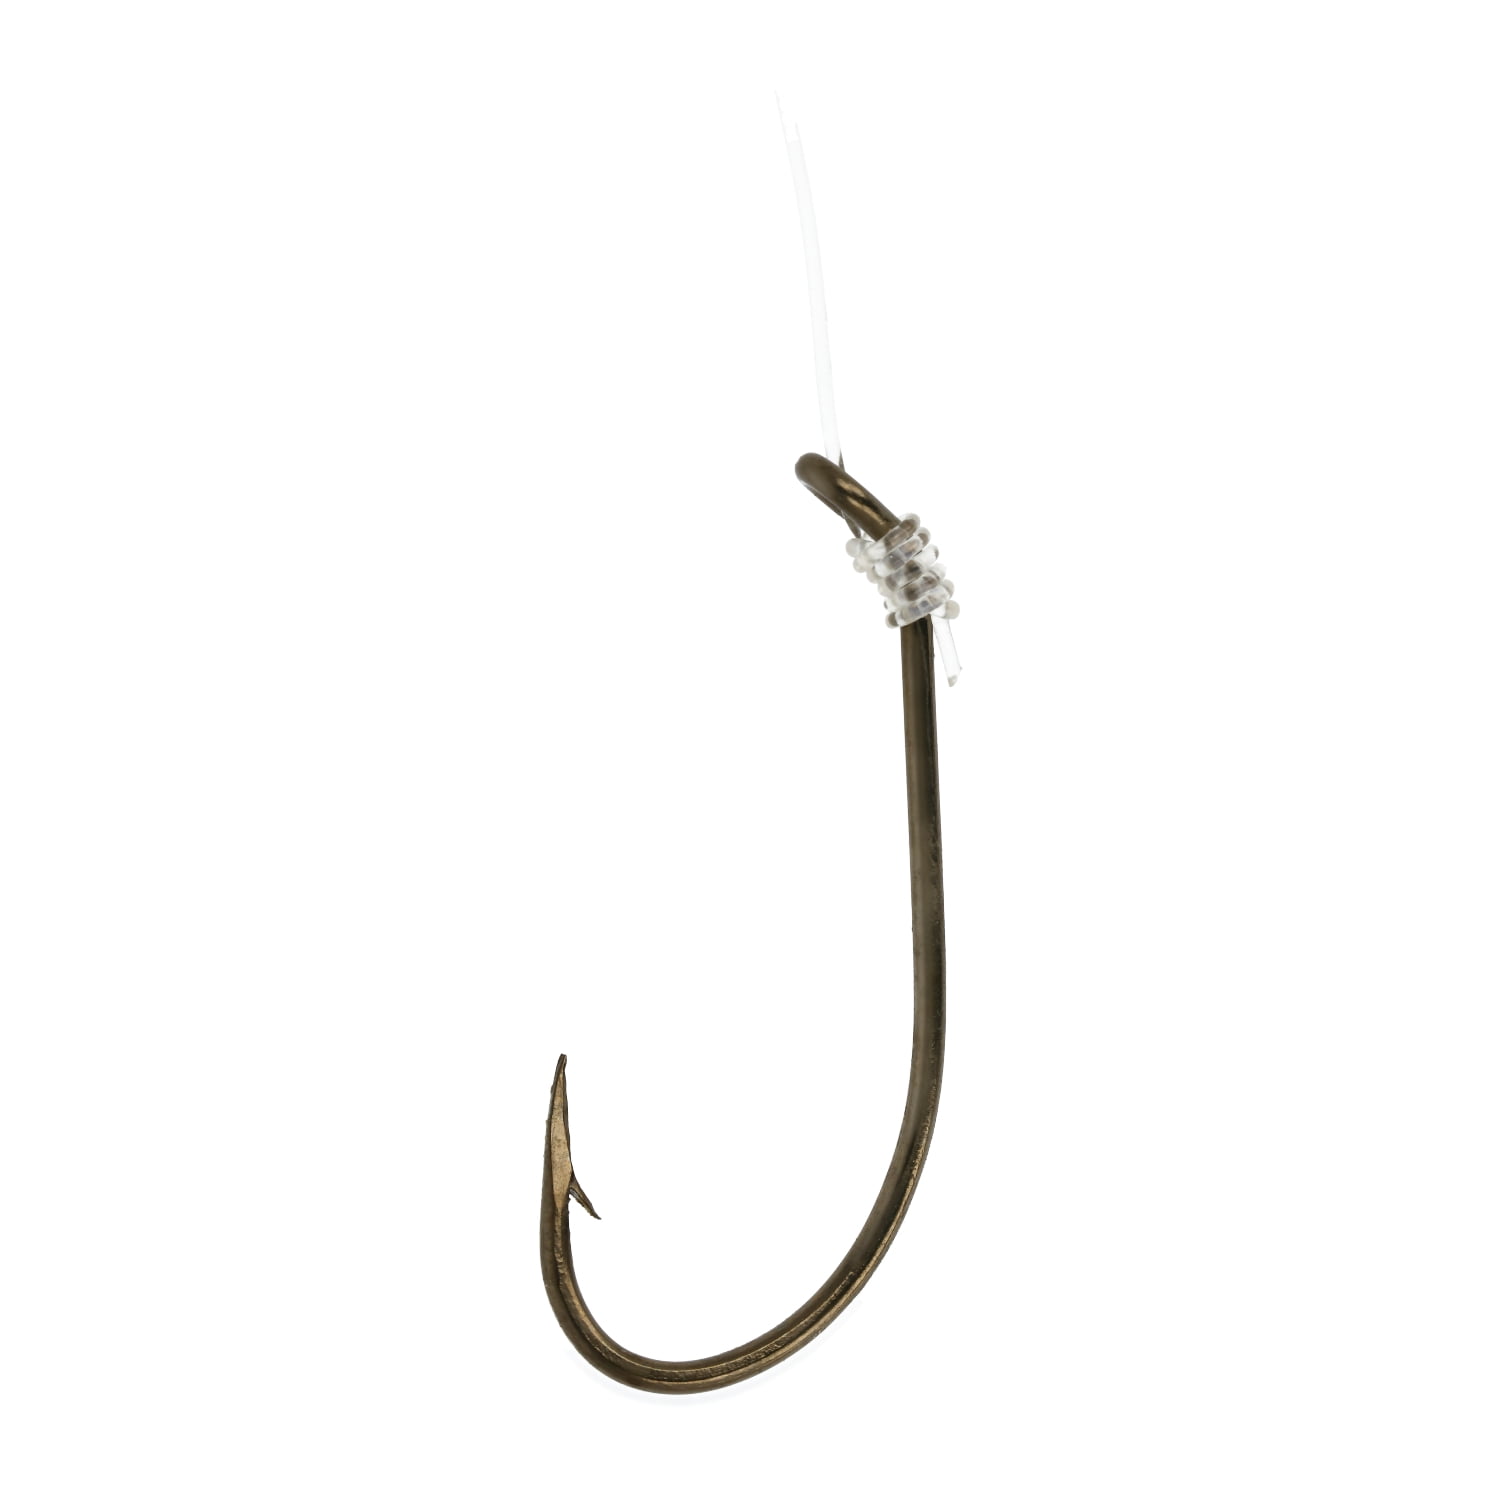 Eagle Claw 031H-2 Plain Shank Snell Fish Hook, Size 2 